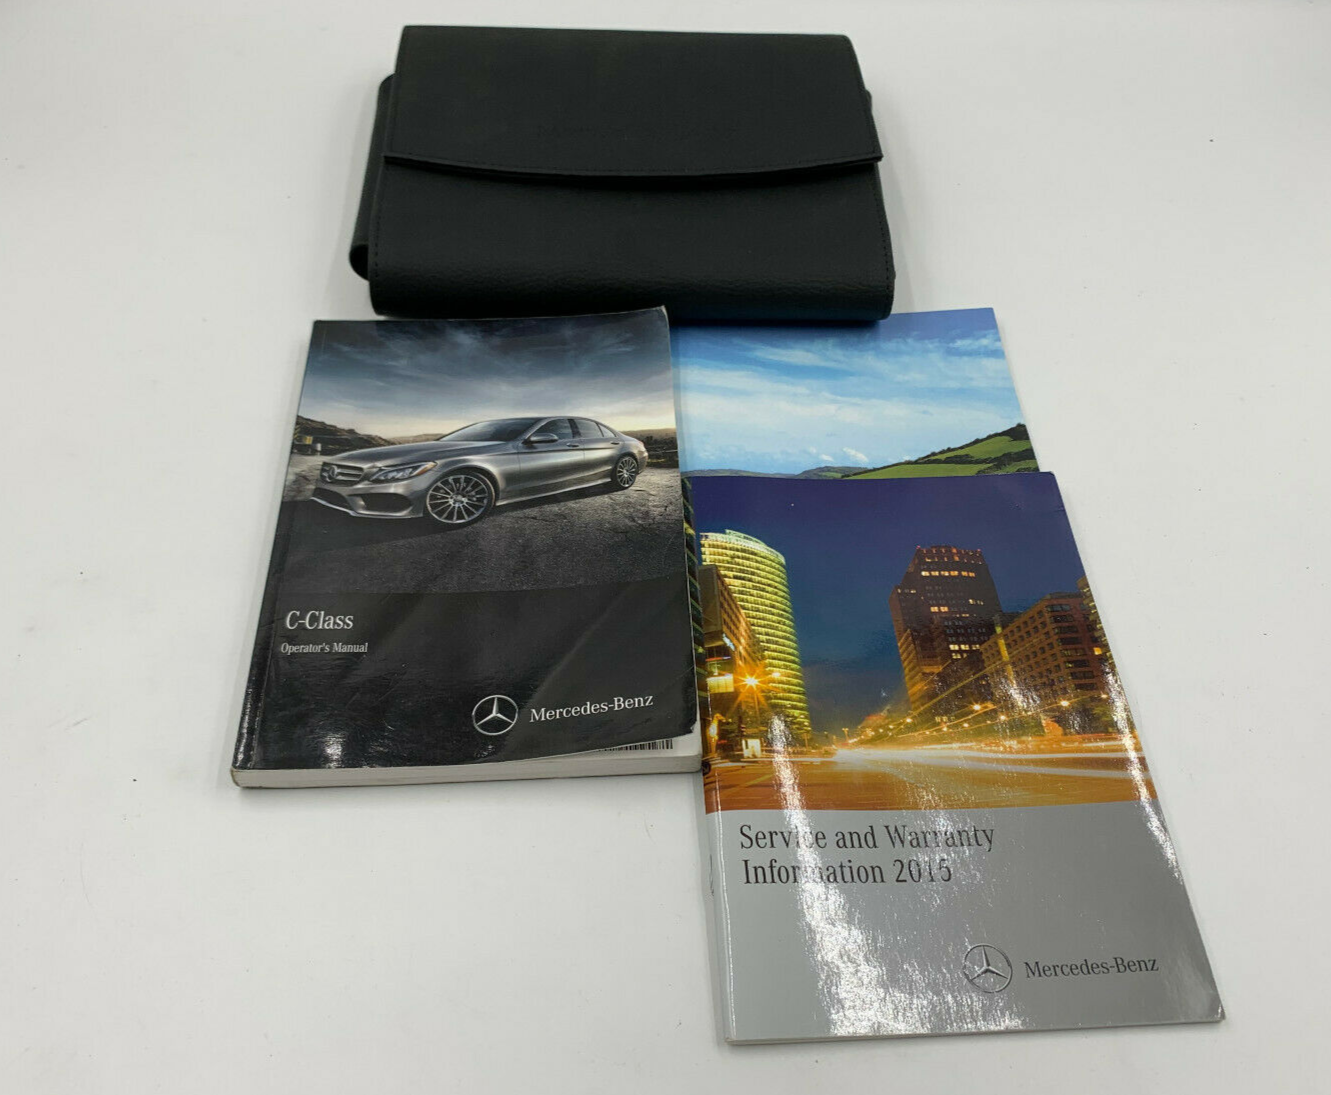 2015 Mercedes-Benz C-Class Owners Manual Handbook with Case OEM K01B50008 - $49.49